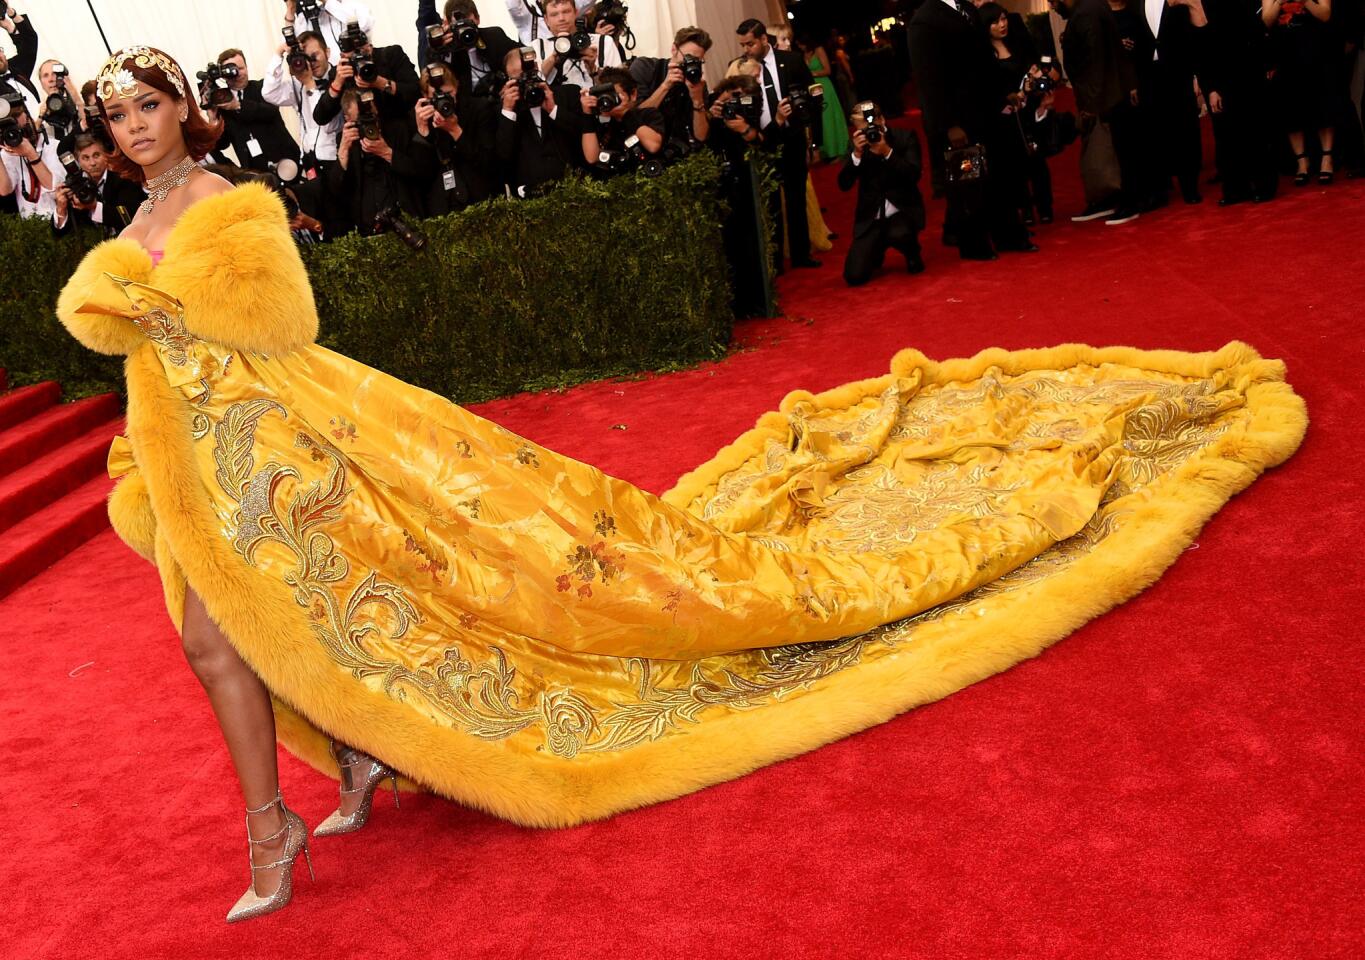 At the 2015 Met Gala, Rihanna's elaborate cape, made by Chinese designer Guo Pei, was so sweepingly huge that it required several train-handlers to help her down the red carpet.